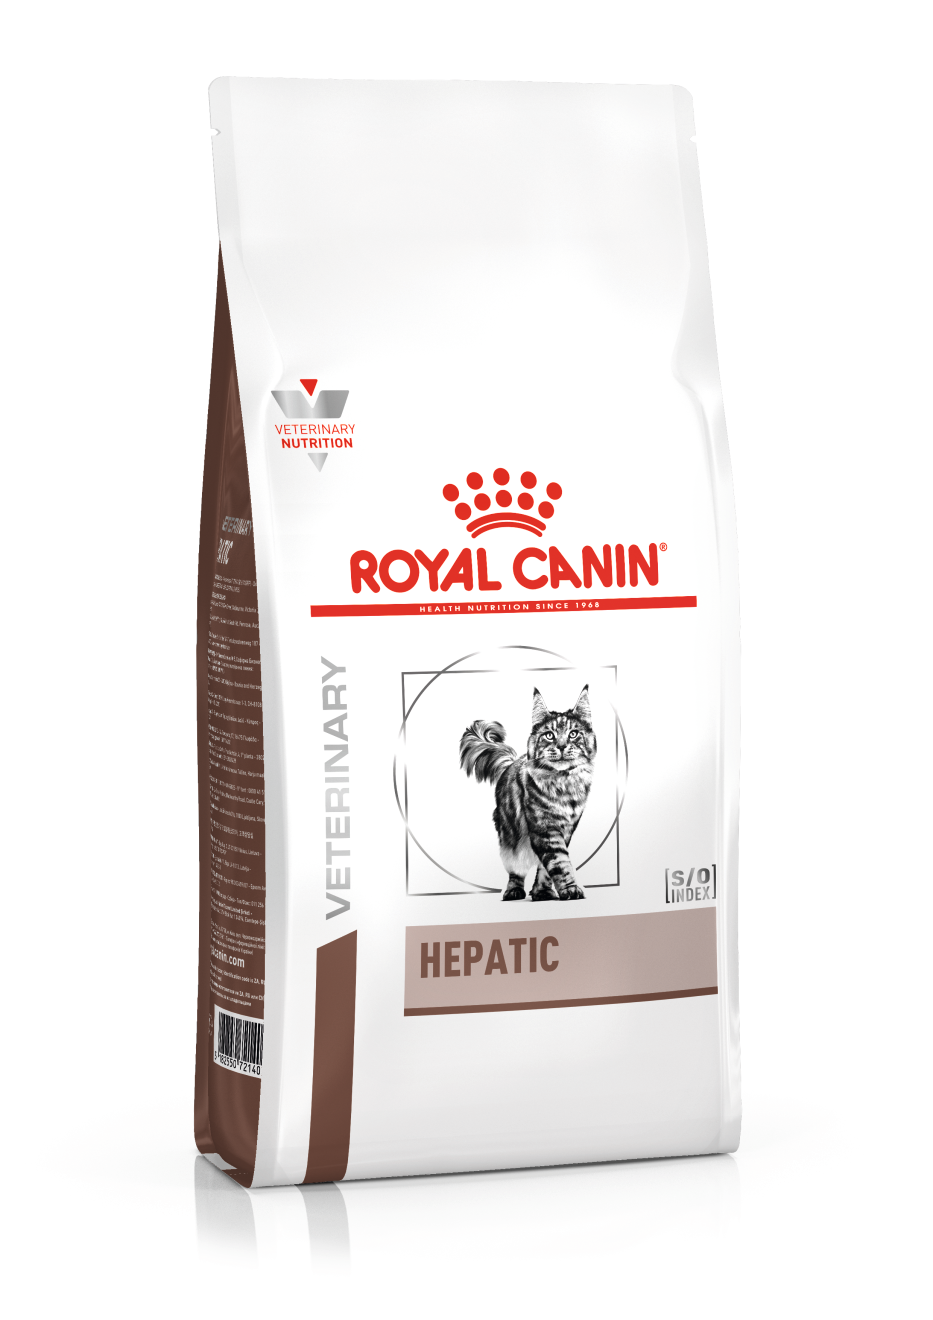 Royal Canin Hepatic for Cats